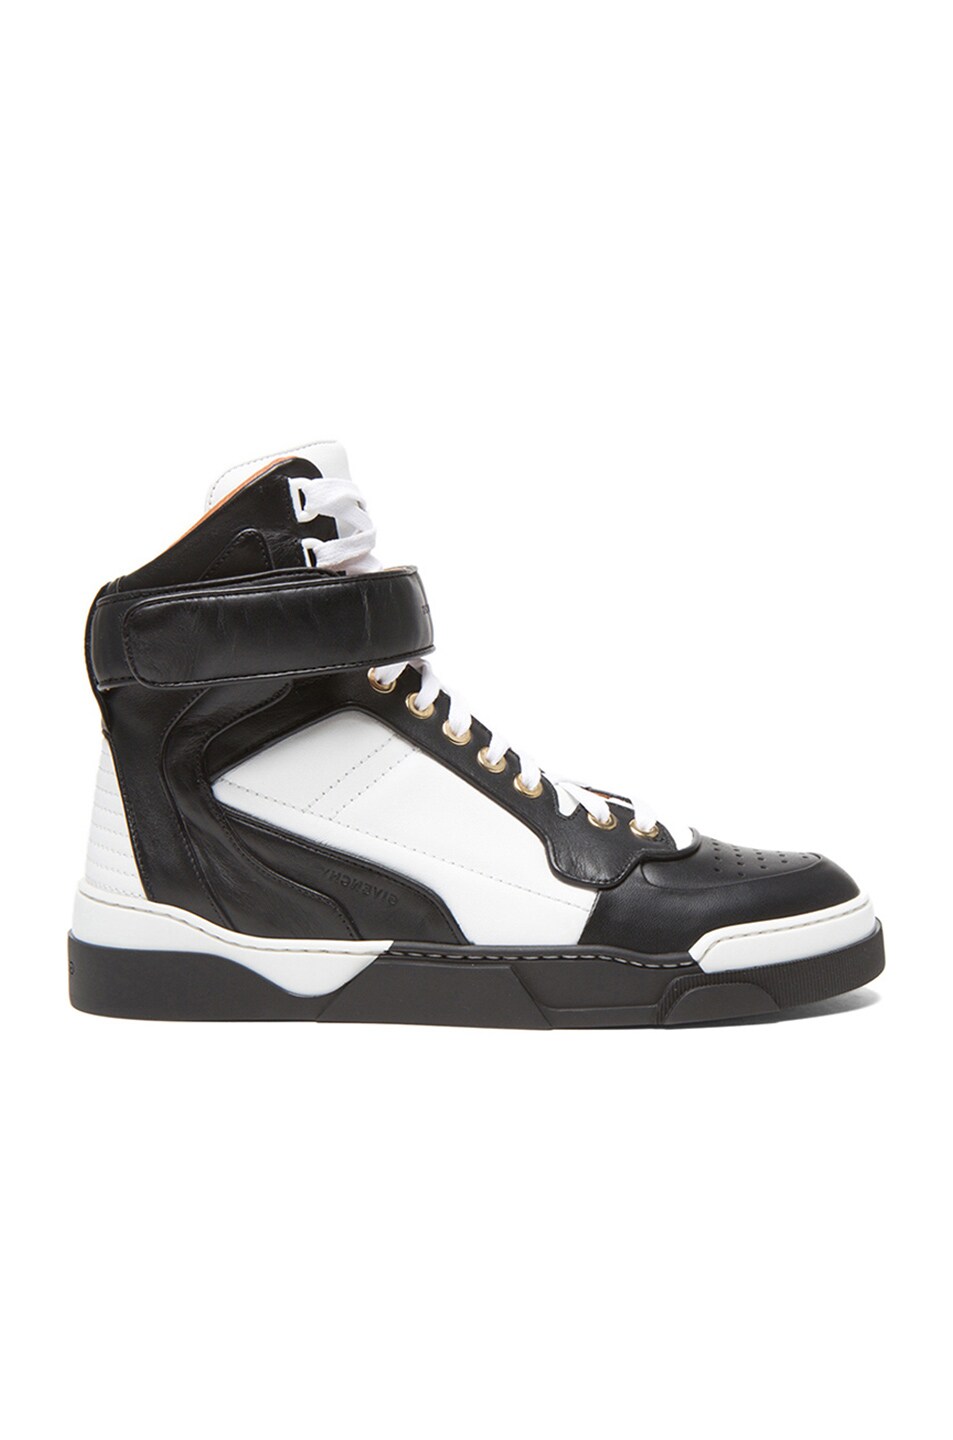 Givenchy High Top Calfskin Leather Sneakers in Black & White | FWRD